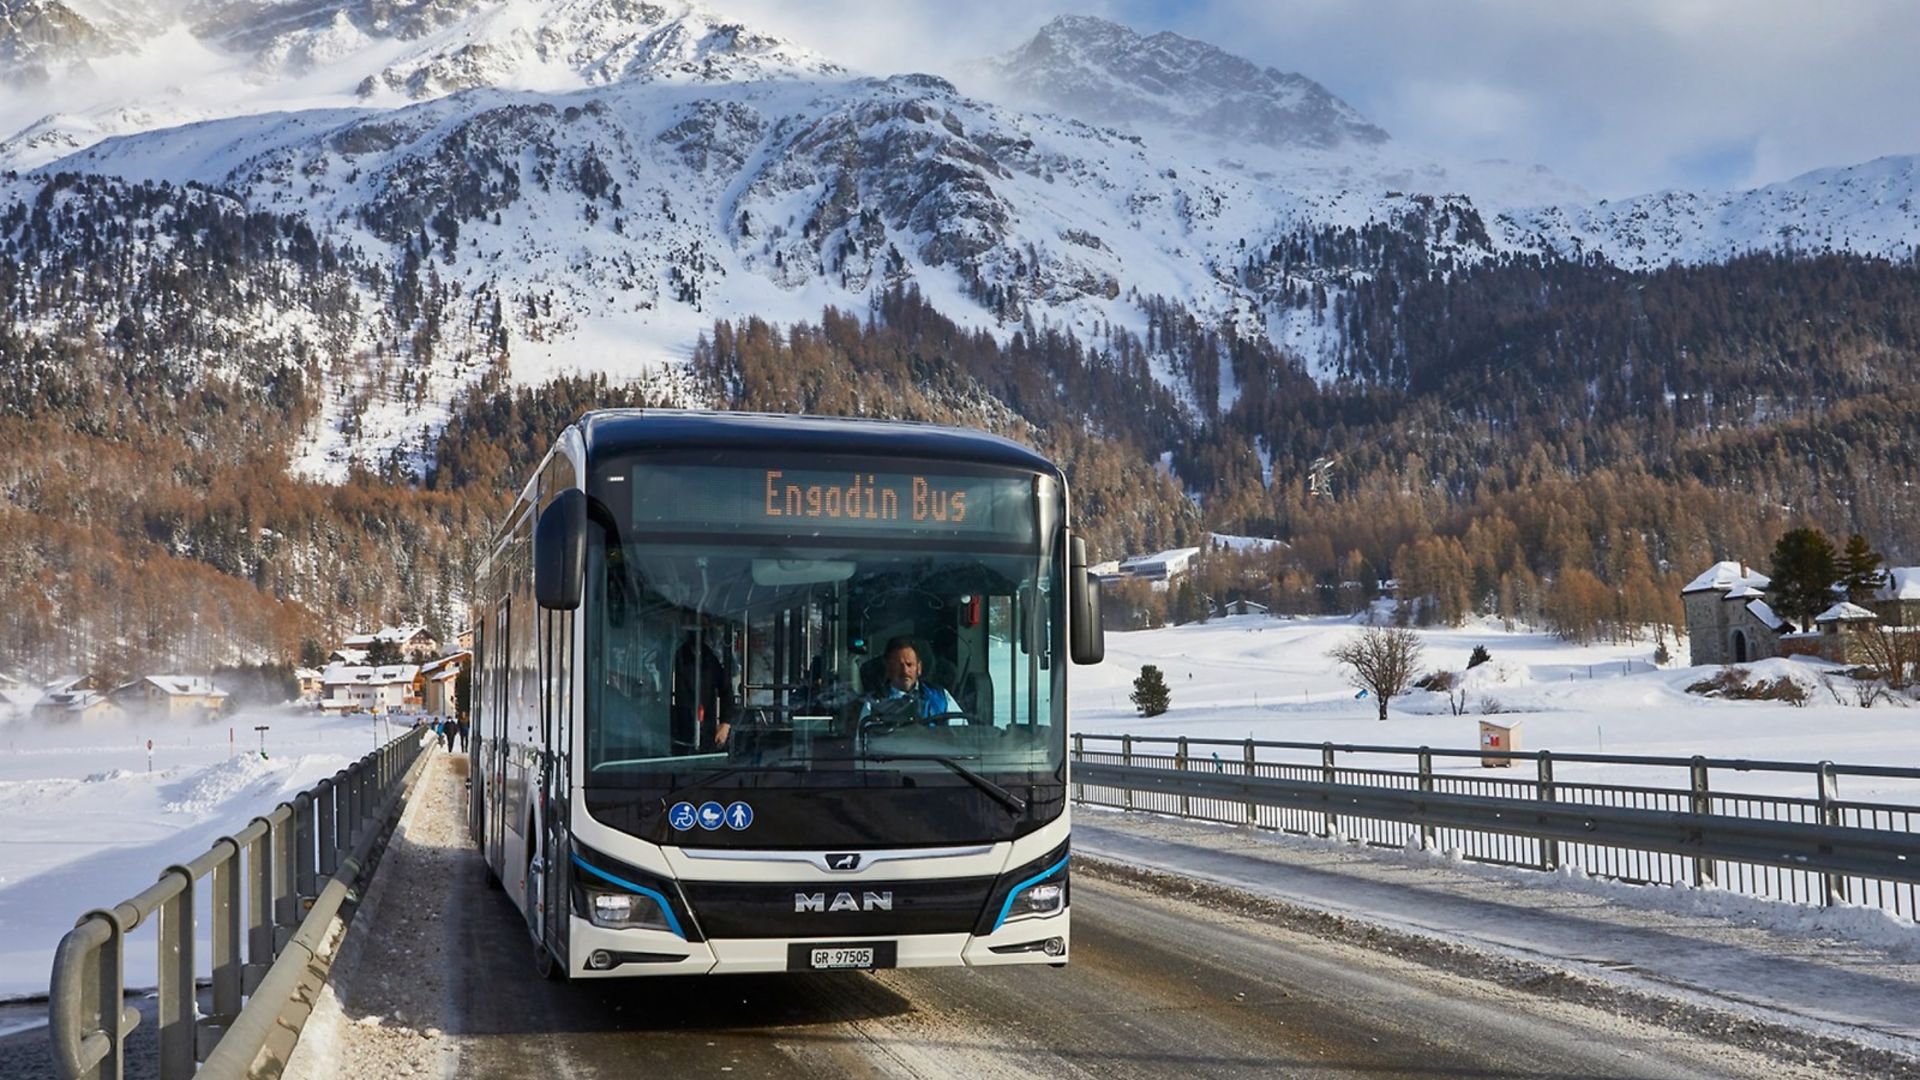 MAN eBuses are already in use in several ski resorts, where they are reducing CO2 emissions.